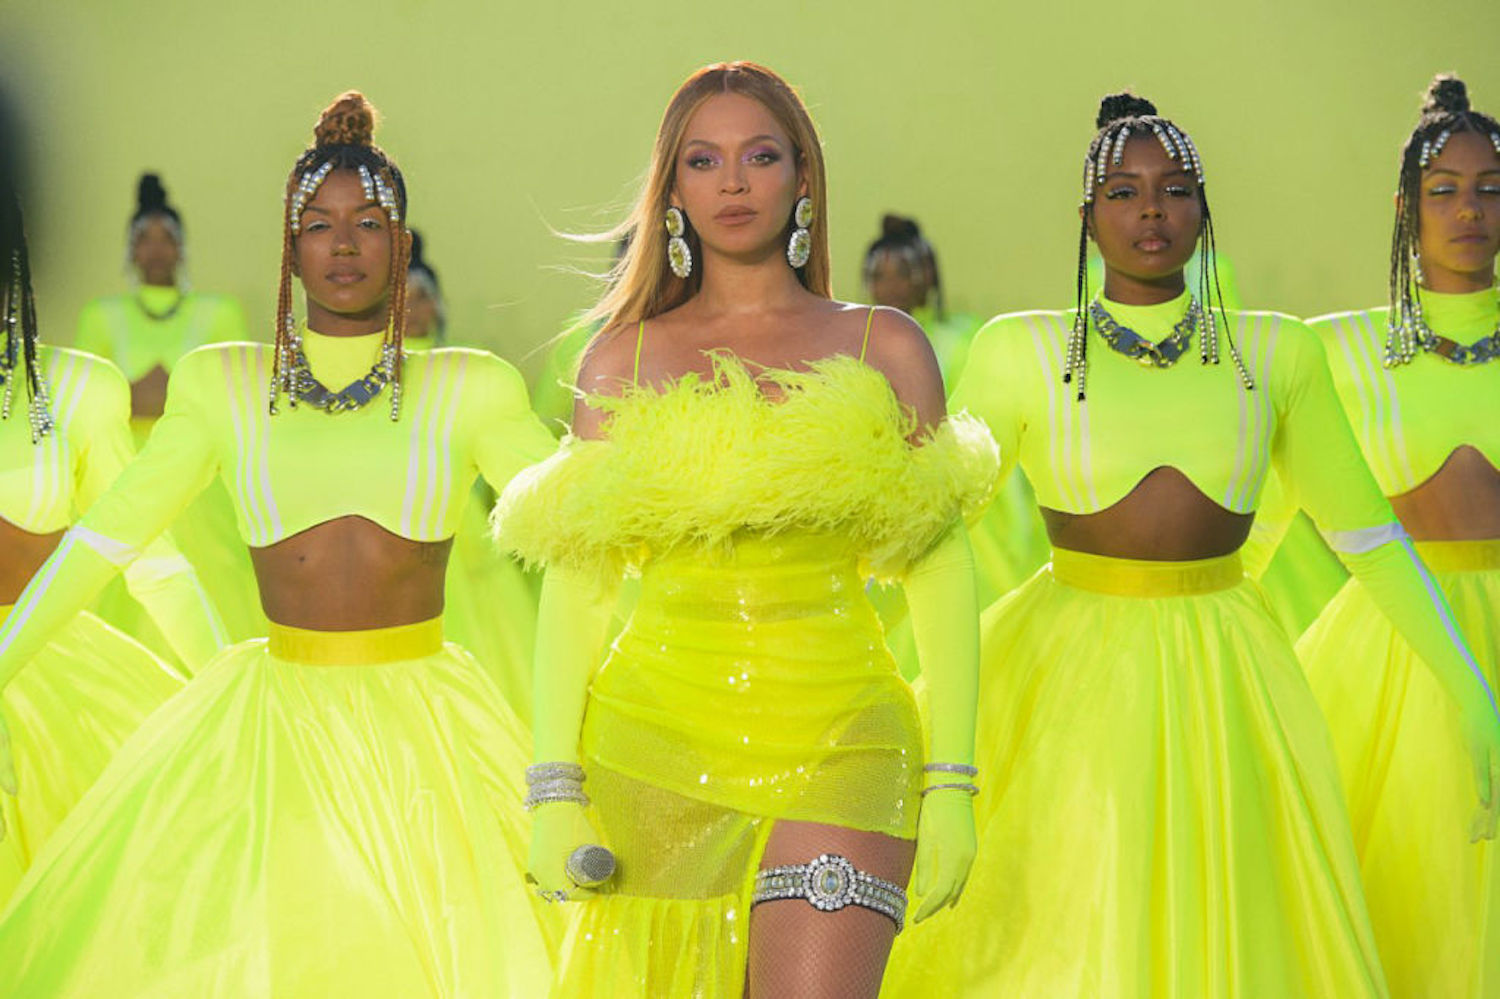 Beyoncé’s New Album ‘RENAISSANCE’ Has Finally Dropped, Here’s Everything We Know